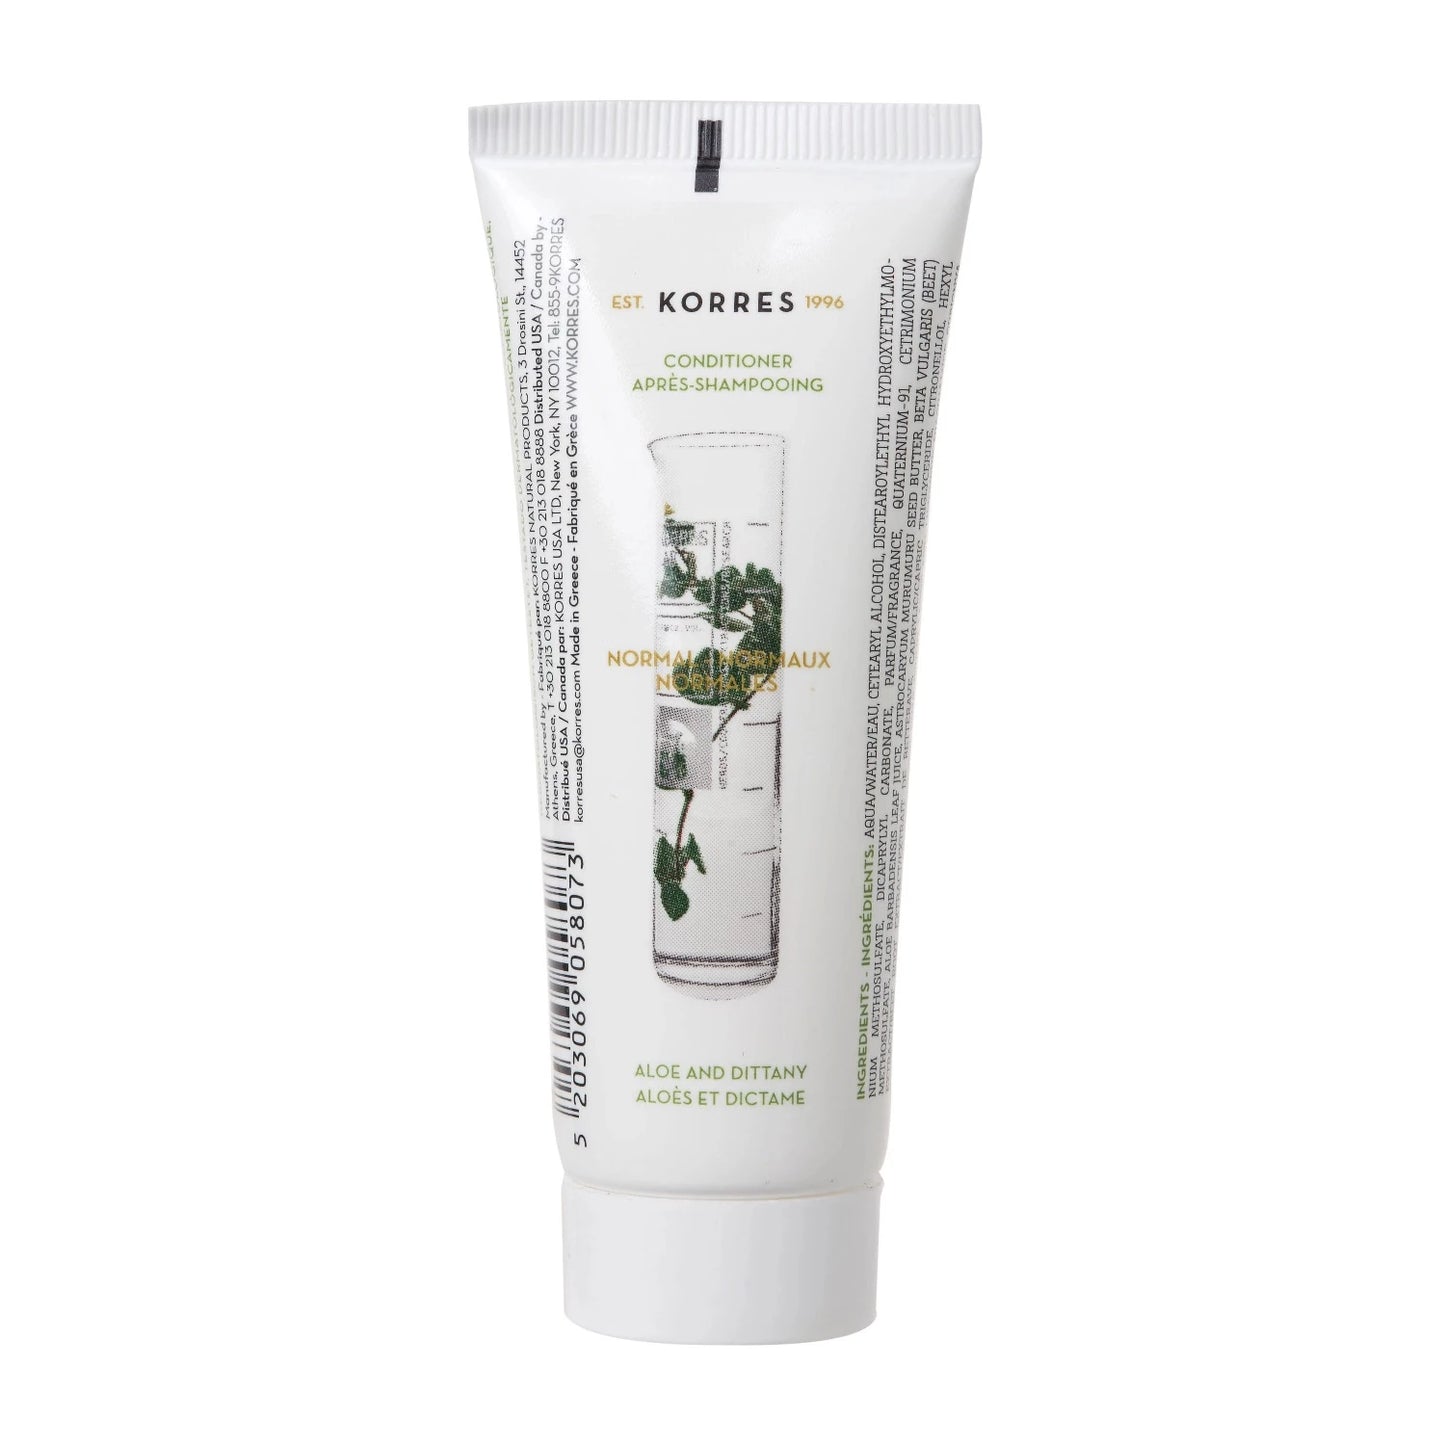 Korres Aloe & Dittany Conditioner, helps to untangle hair without producing residue, making it ideal for normal hair types. 